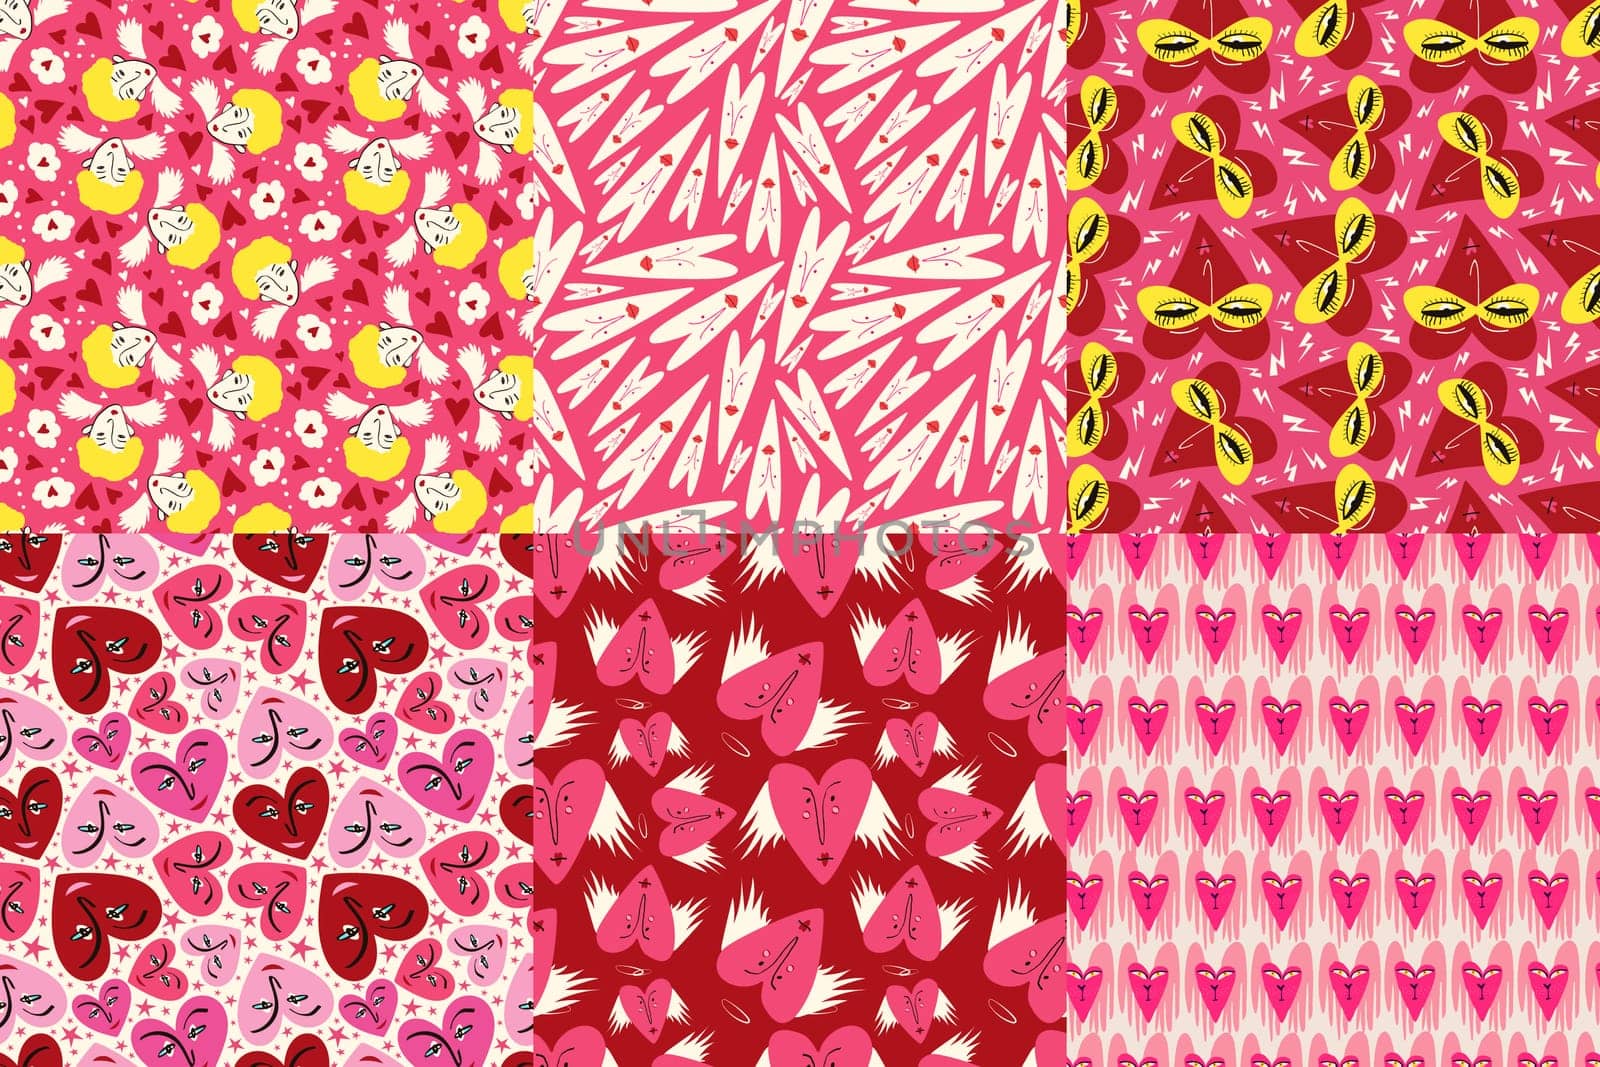 Valentines Day set of Bright and Cool Seamless Patterns. Pattern with Cool Quirky Playful Bright Hearts Print by Dustick